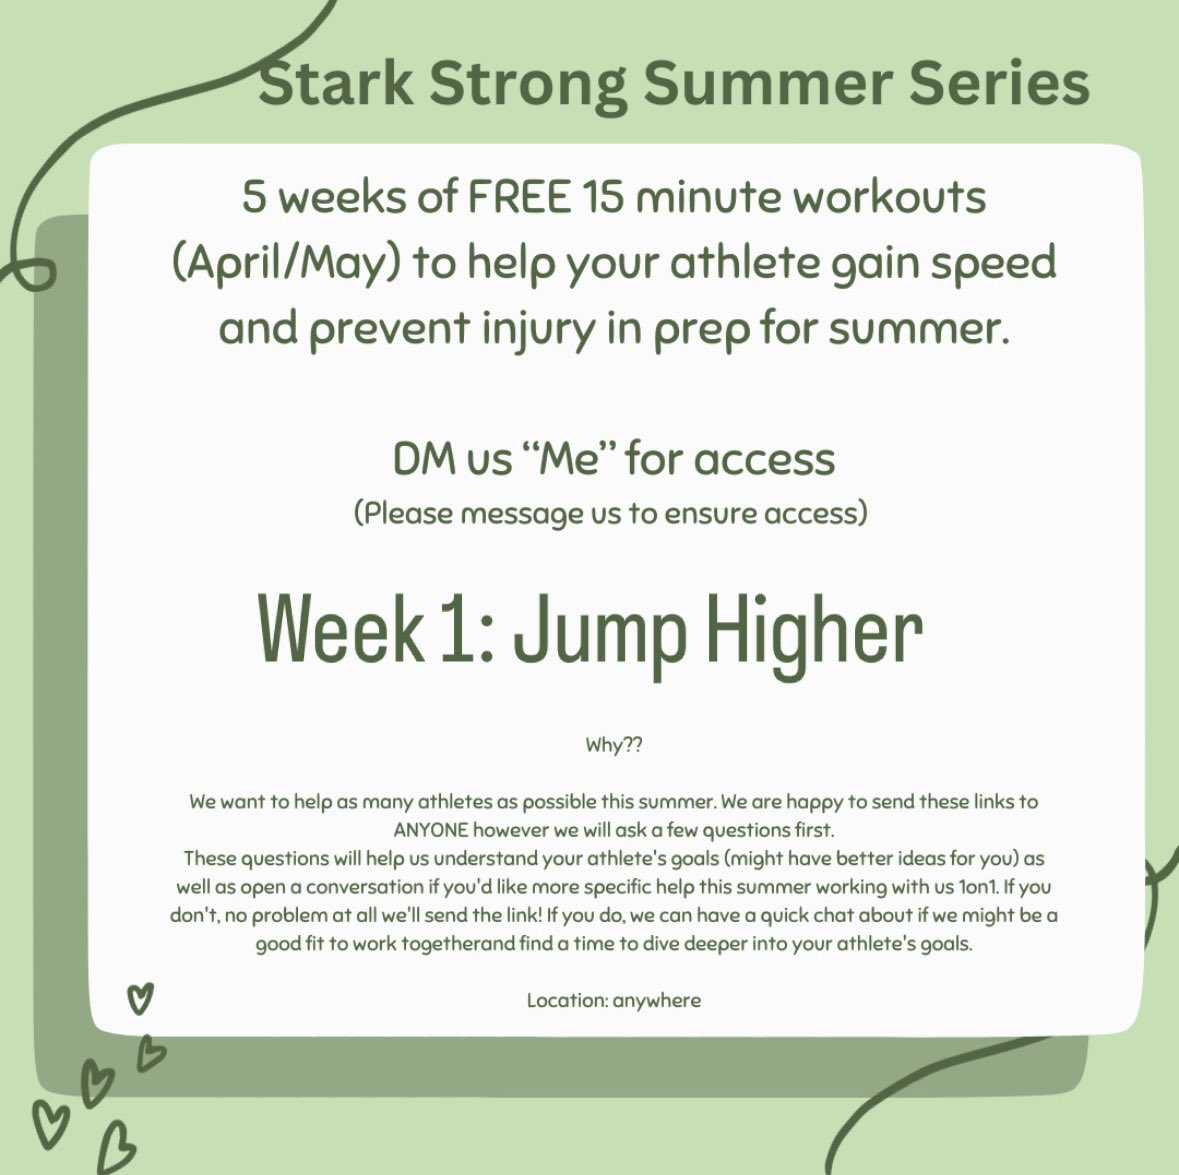 Summer is around the corner but our 5 weeks of FREE 15 minute workouts (April/May) to help your athlete gain speed and prevent injury in prep for summer is HERE NOW. DM “me” for access